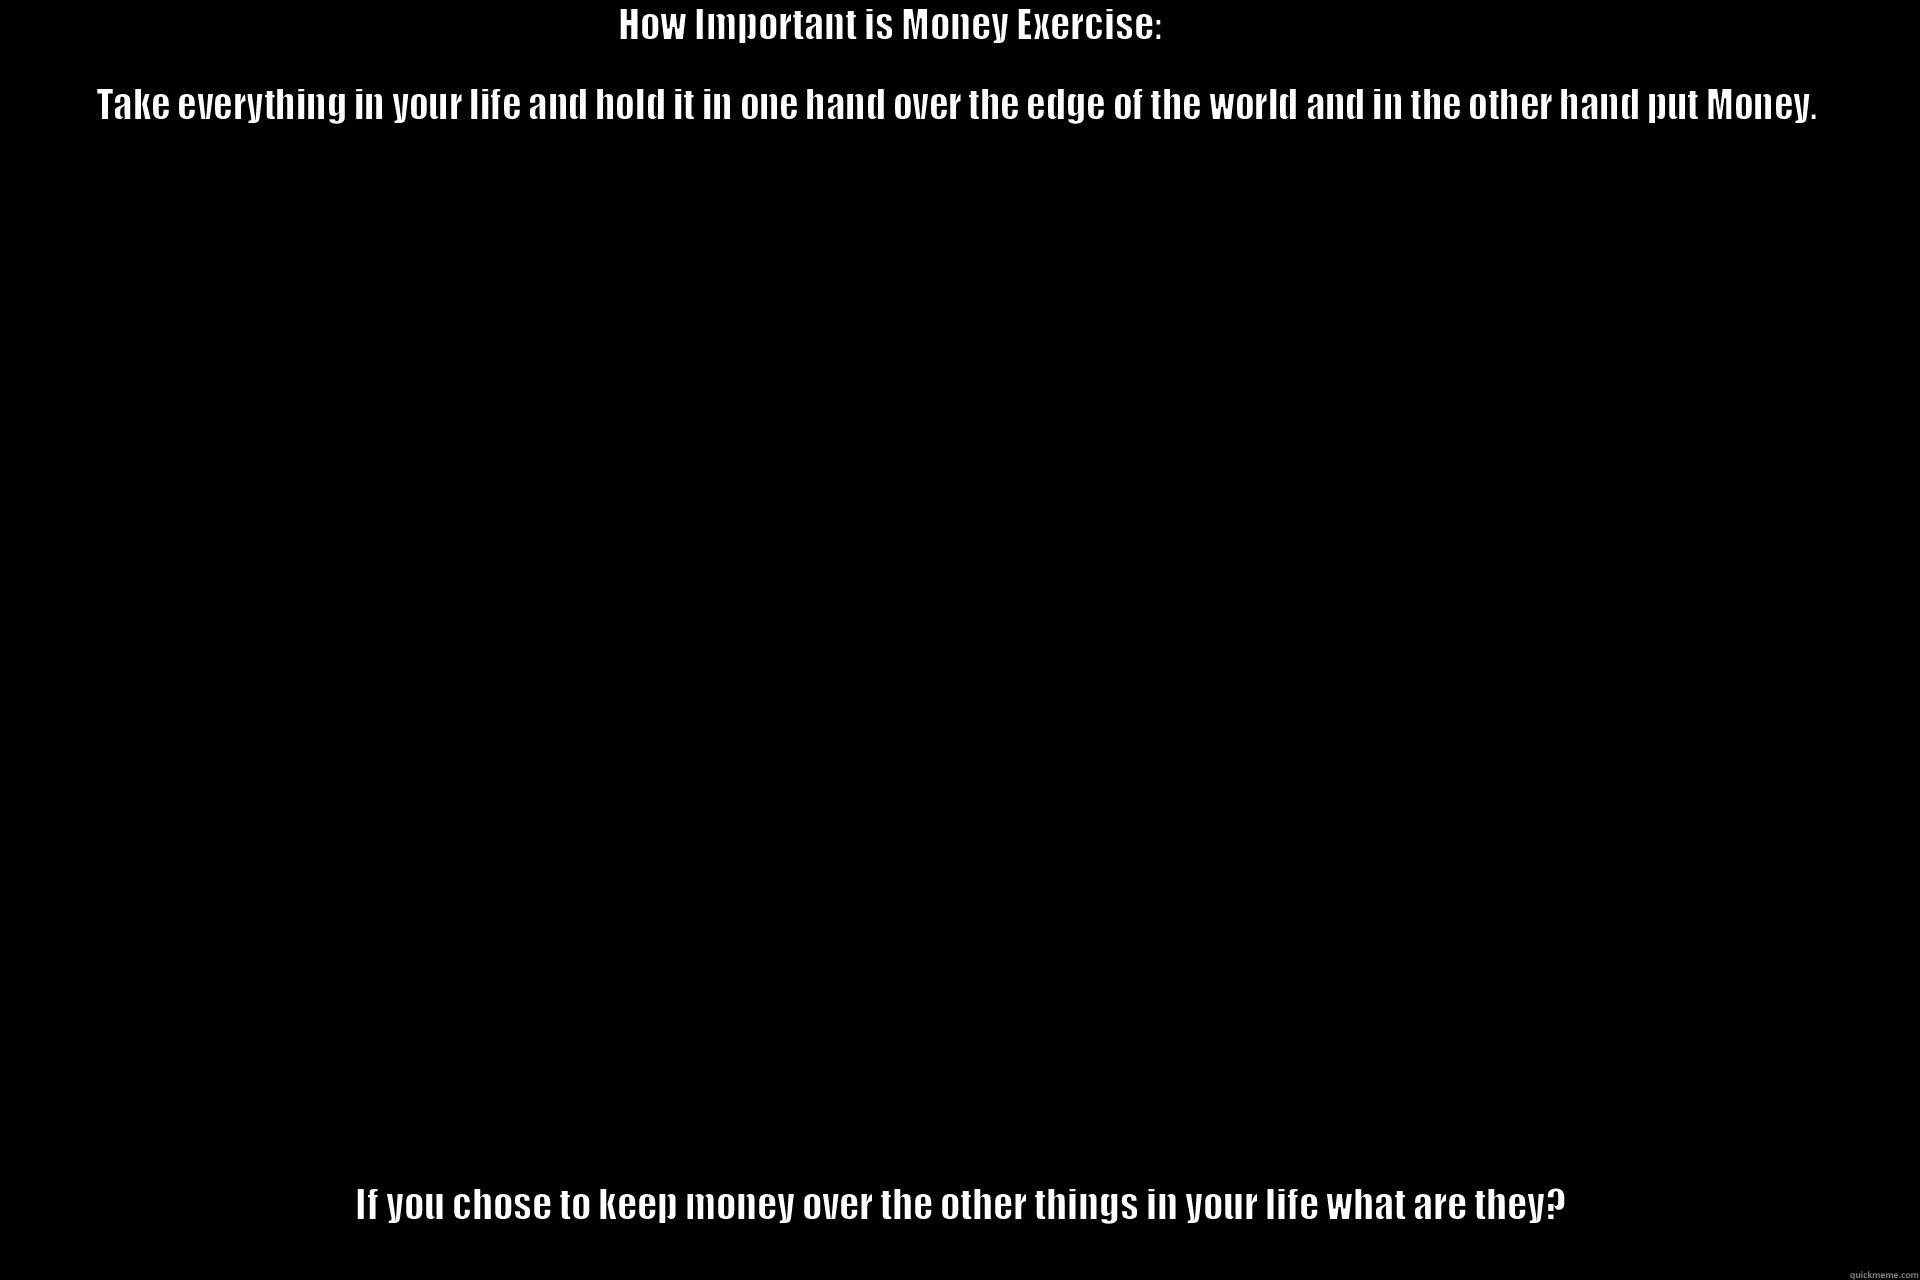 How Important is Money to you? -                                                                                         HOW IMPORTANT IS MONEY EXERCISE:                                                                                                                                         IF YOU CHOSE TO KEEP MONEY OVER THE OTHER THINGS IN YOUR LIFE WHAT ARE THEY?                                                                                                                                                                                   Misc